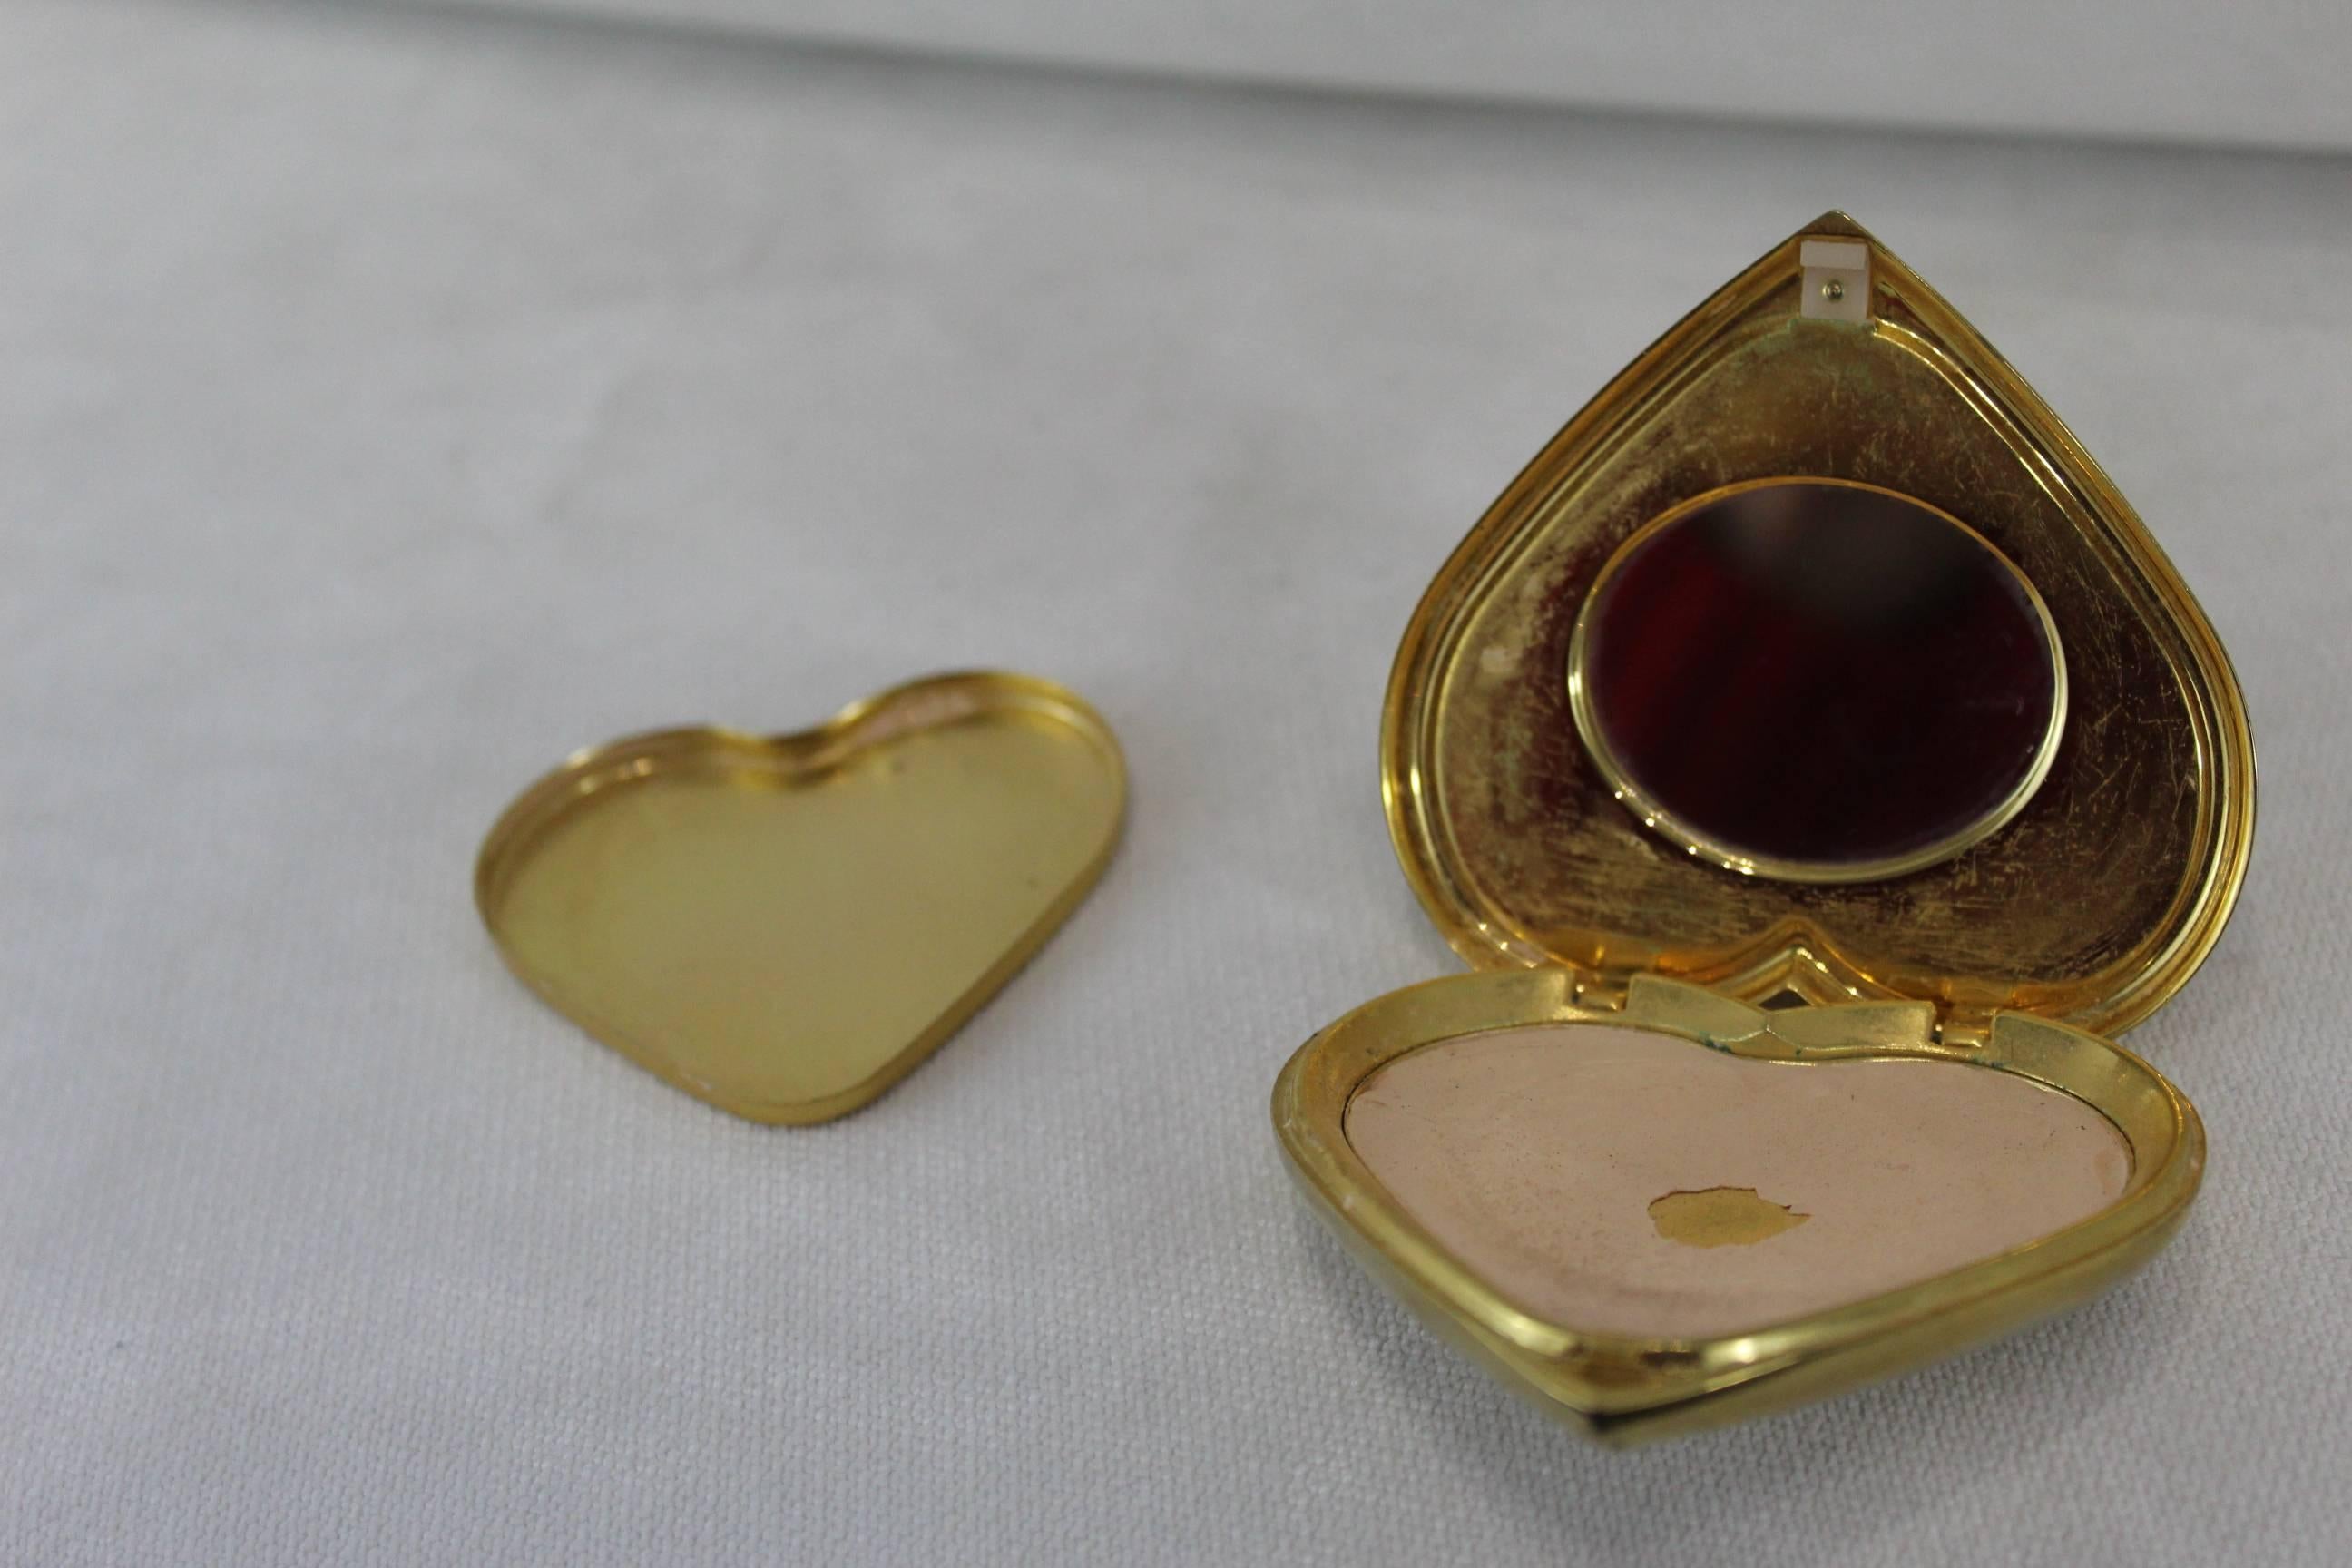 Brown Yves Saint Laurent Vintage Heart Beauty Powder Box and Mirror